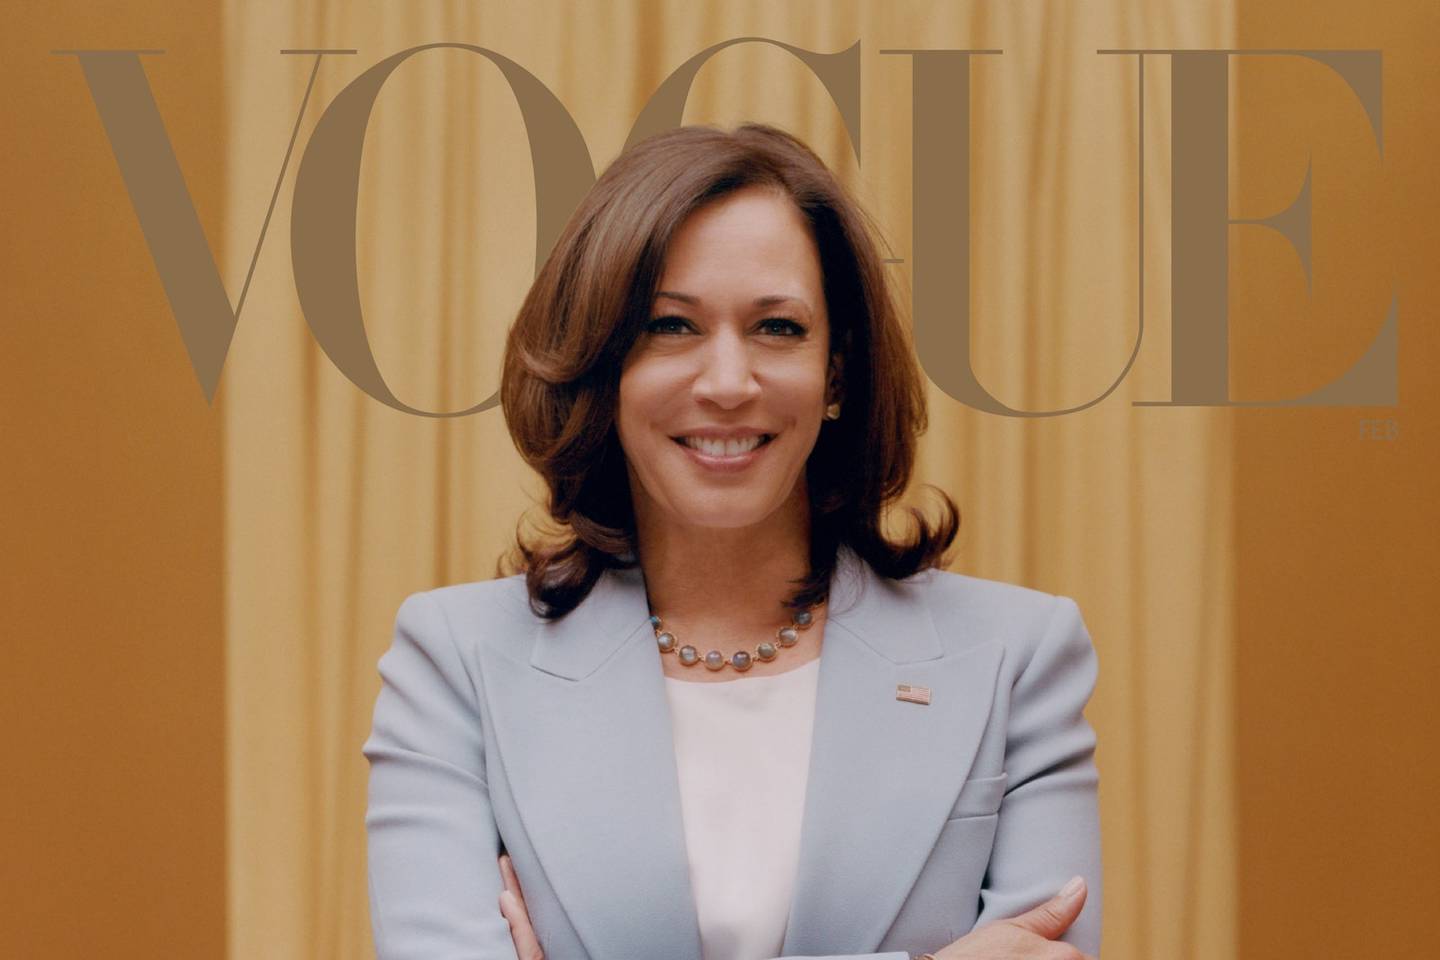 Kamala Harris on the cover of Vogue. Tyler Mitchell